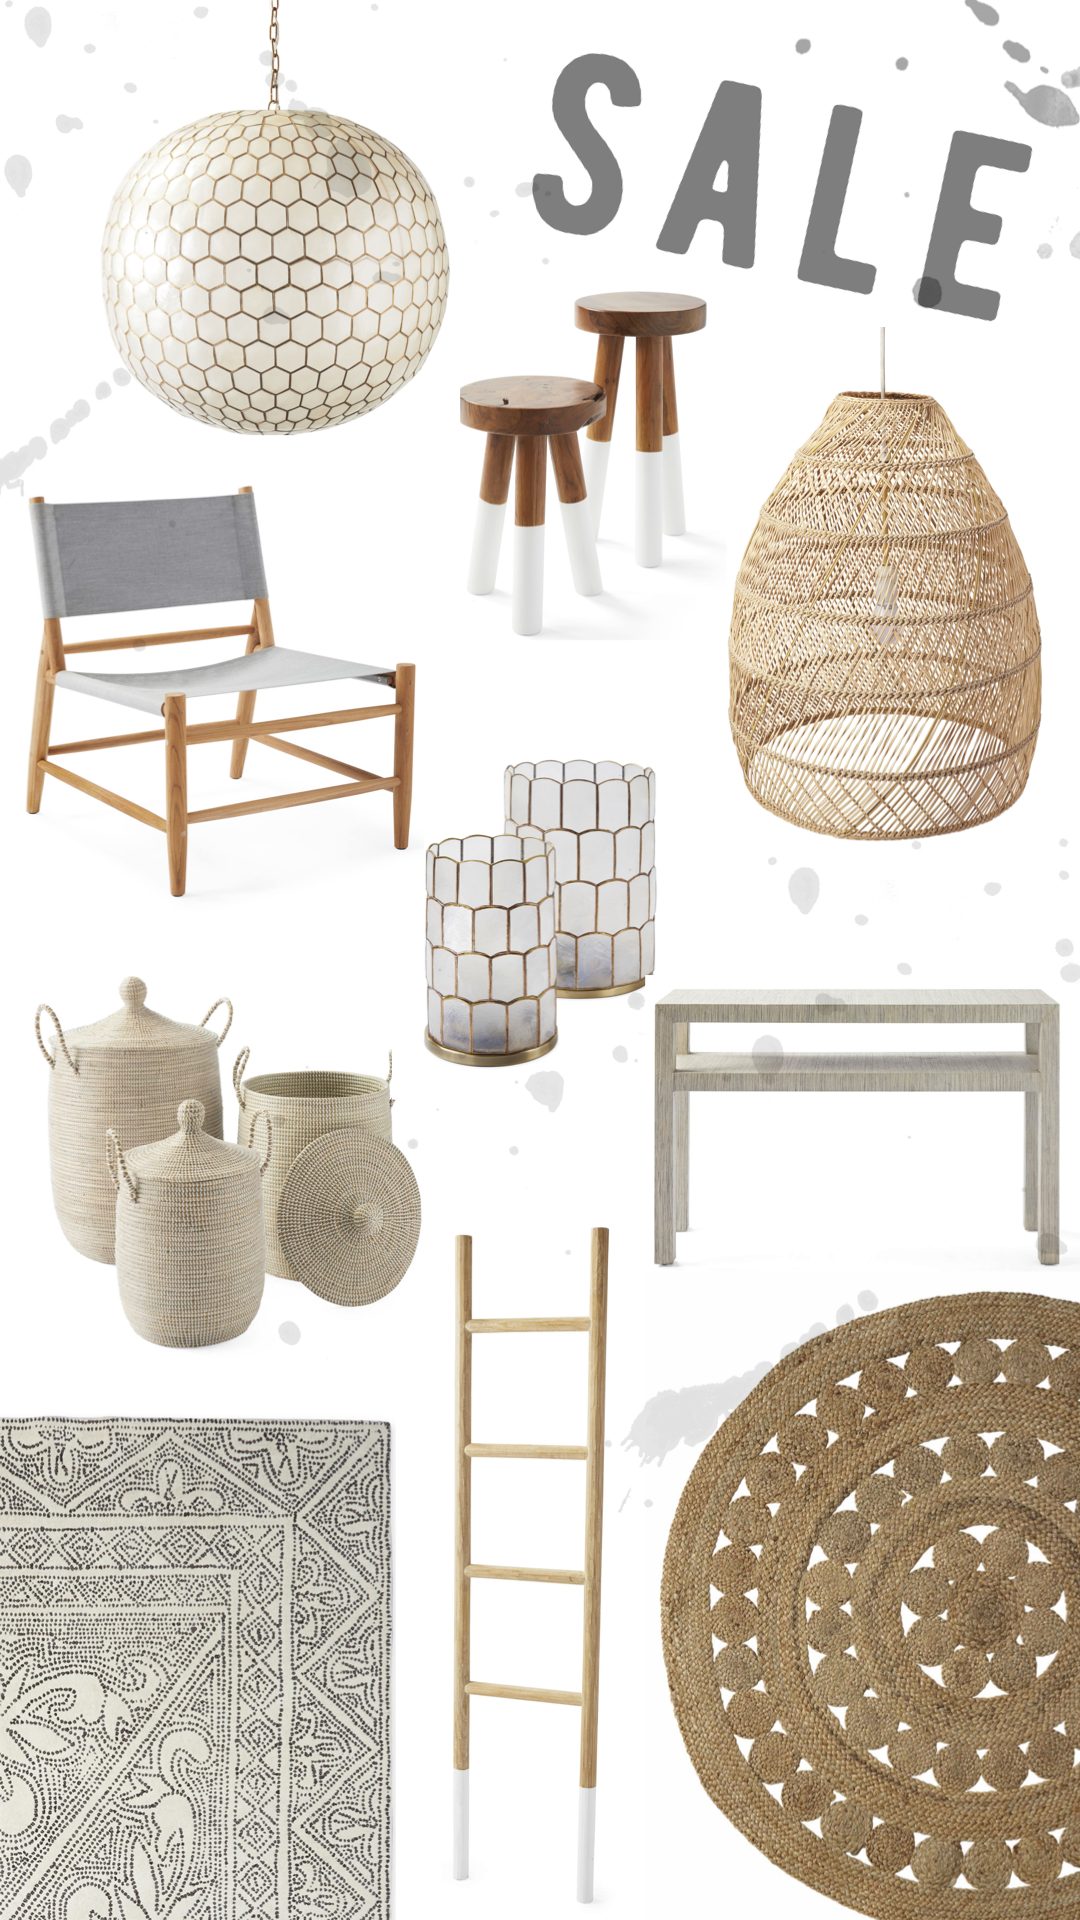 serena and lily sale | SERENA & LILY SALE by popular San Francisco life and style blog, Just Add Glam: collage image of Serena and Lily pendant lights, Serena and Lily rugs, Serena and Lily ladder, Serena and Lily baskets, and Serena and Lily stools. 